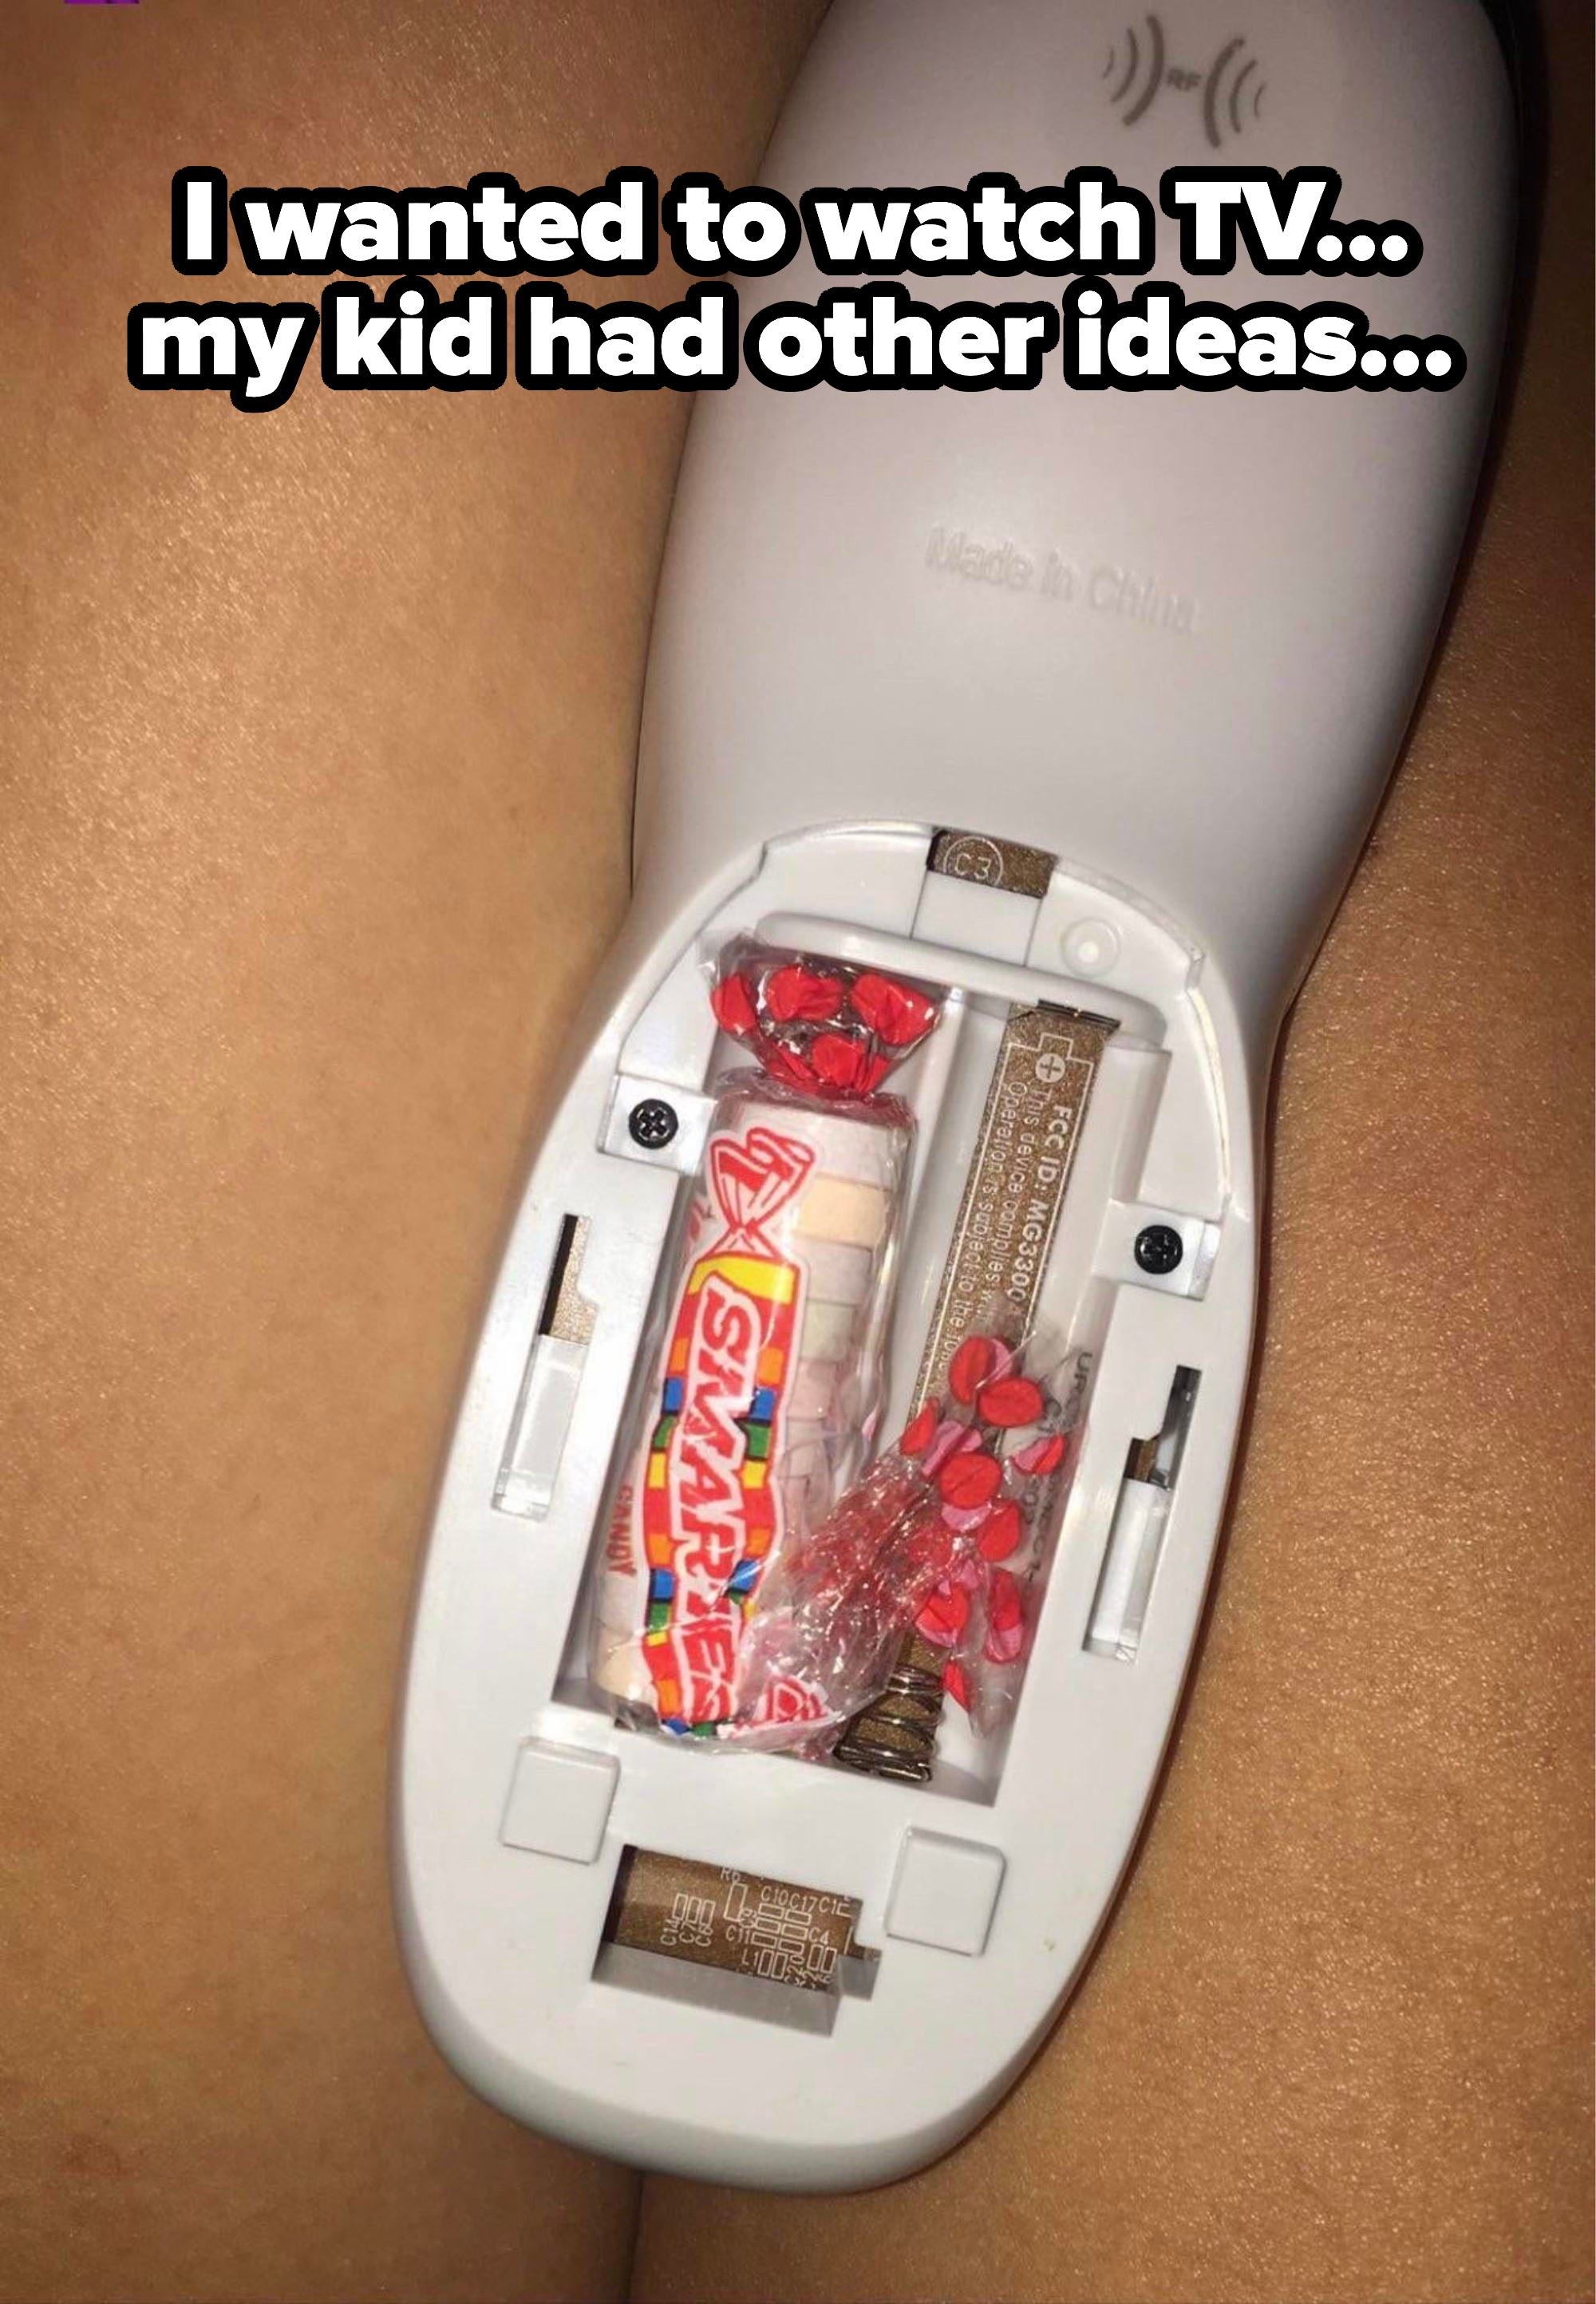 Smarties candies and candy wrapper where remote control batteries should be